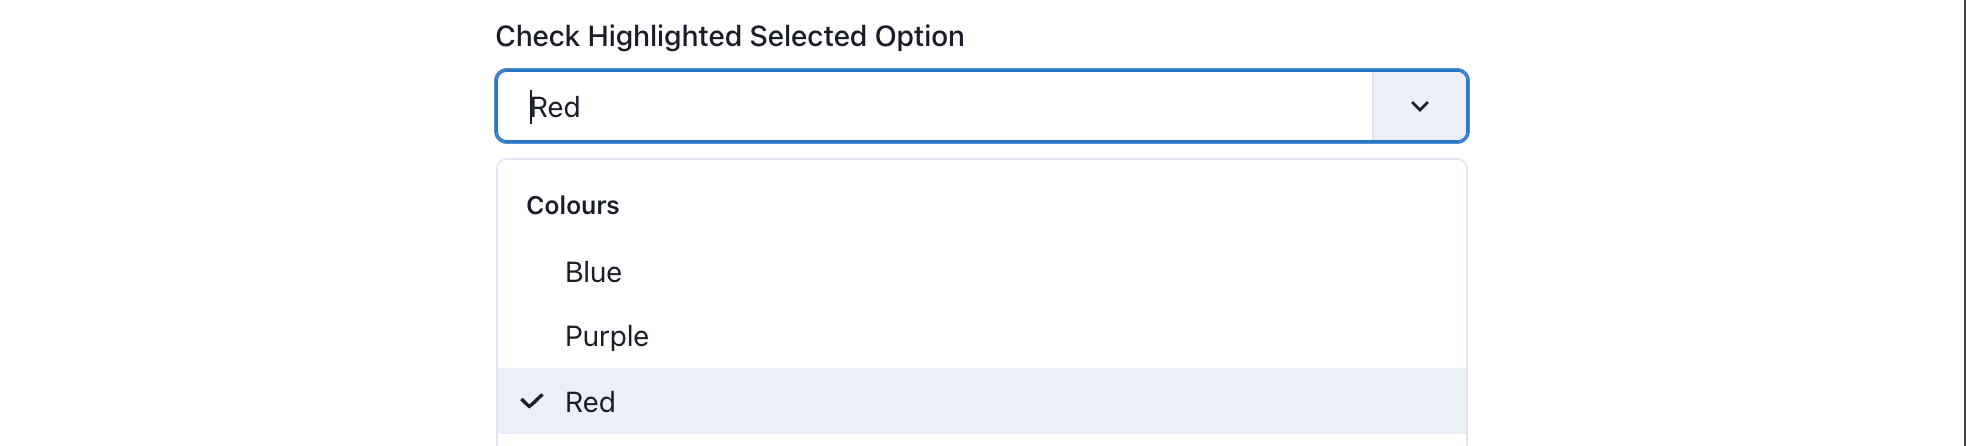 check-selected-option.png